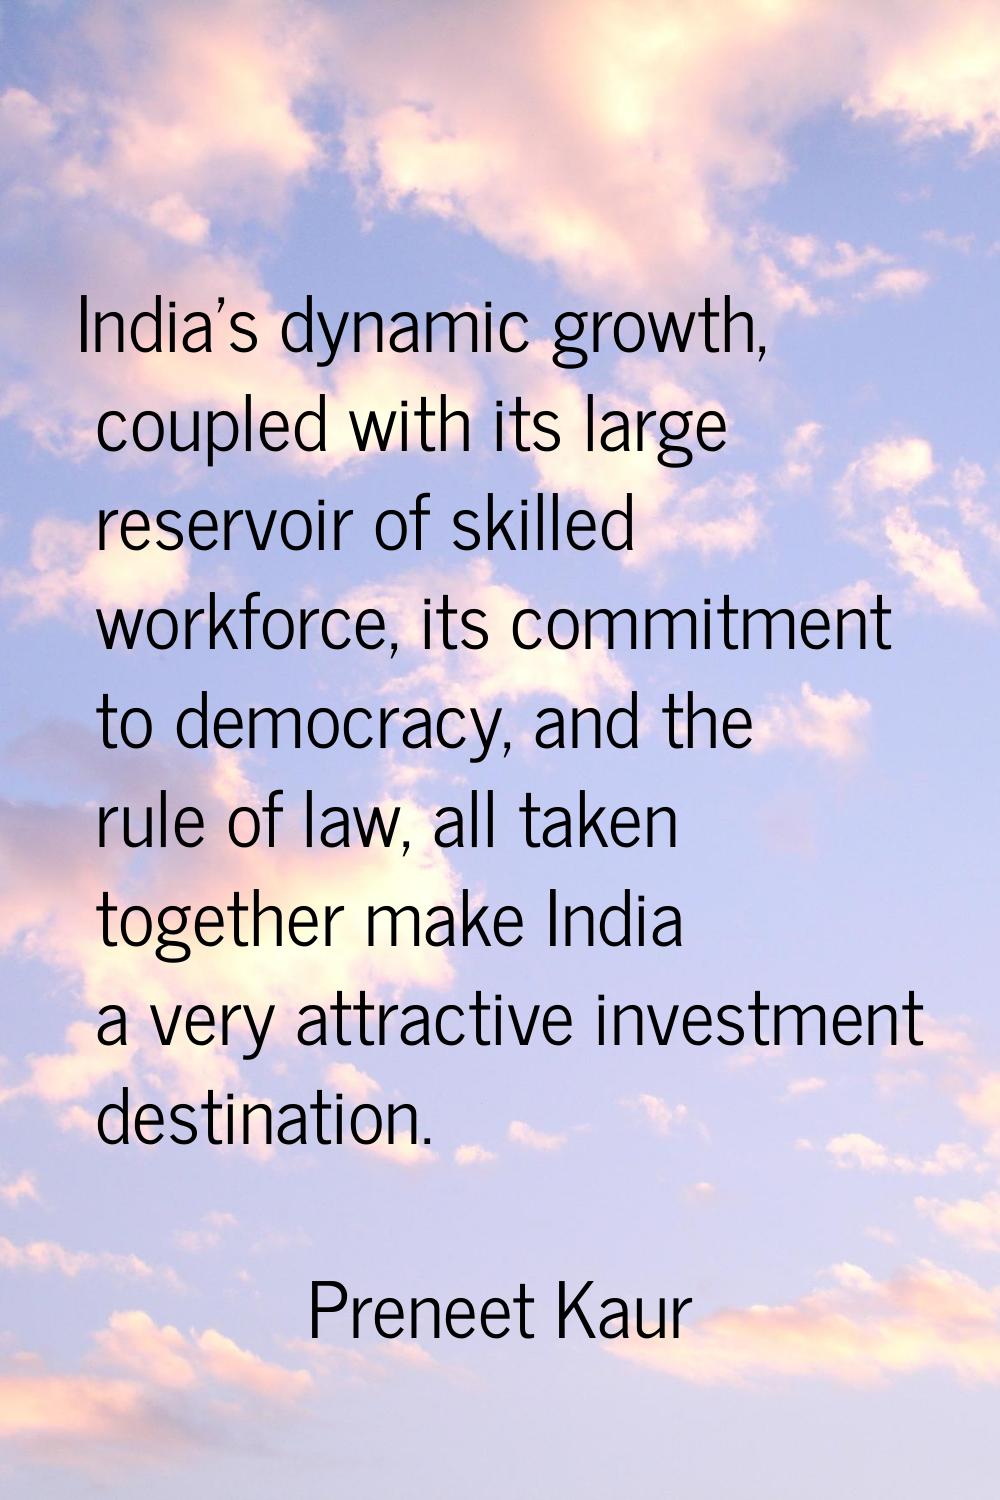 India's dynamic growth, coupled with its large reservoir of skilled workforce, its commitment to de